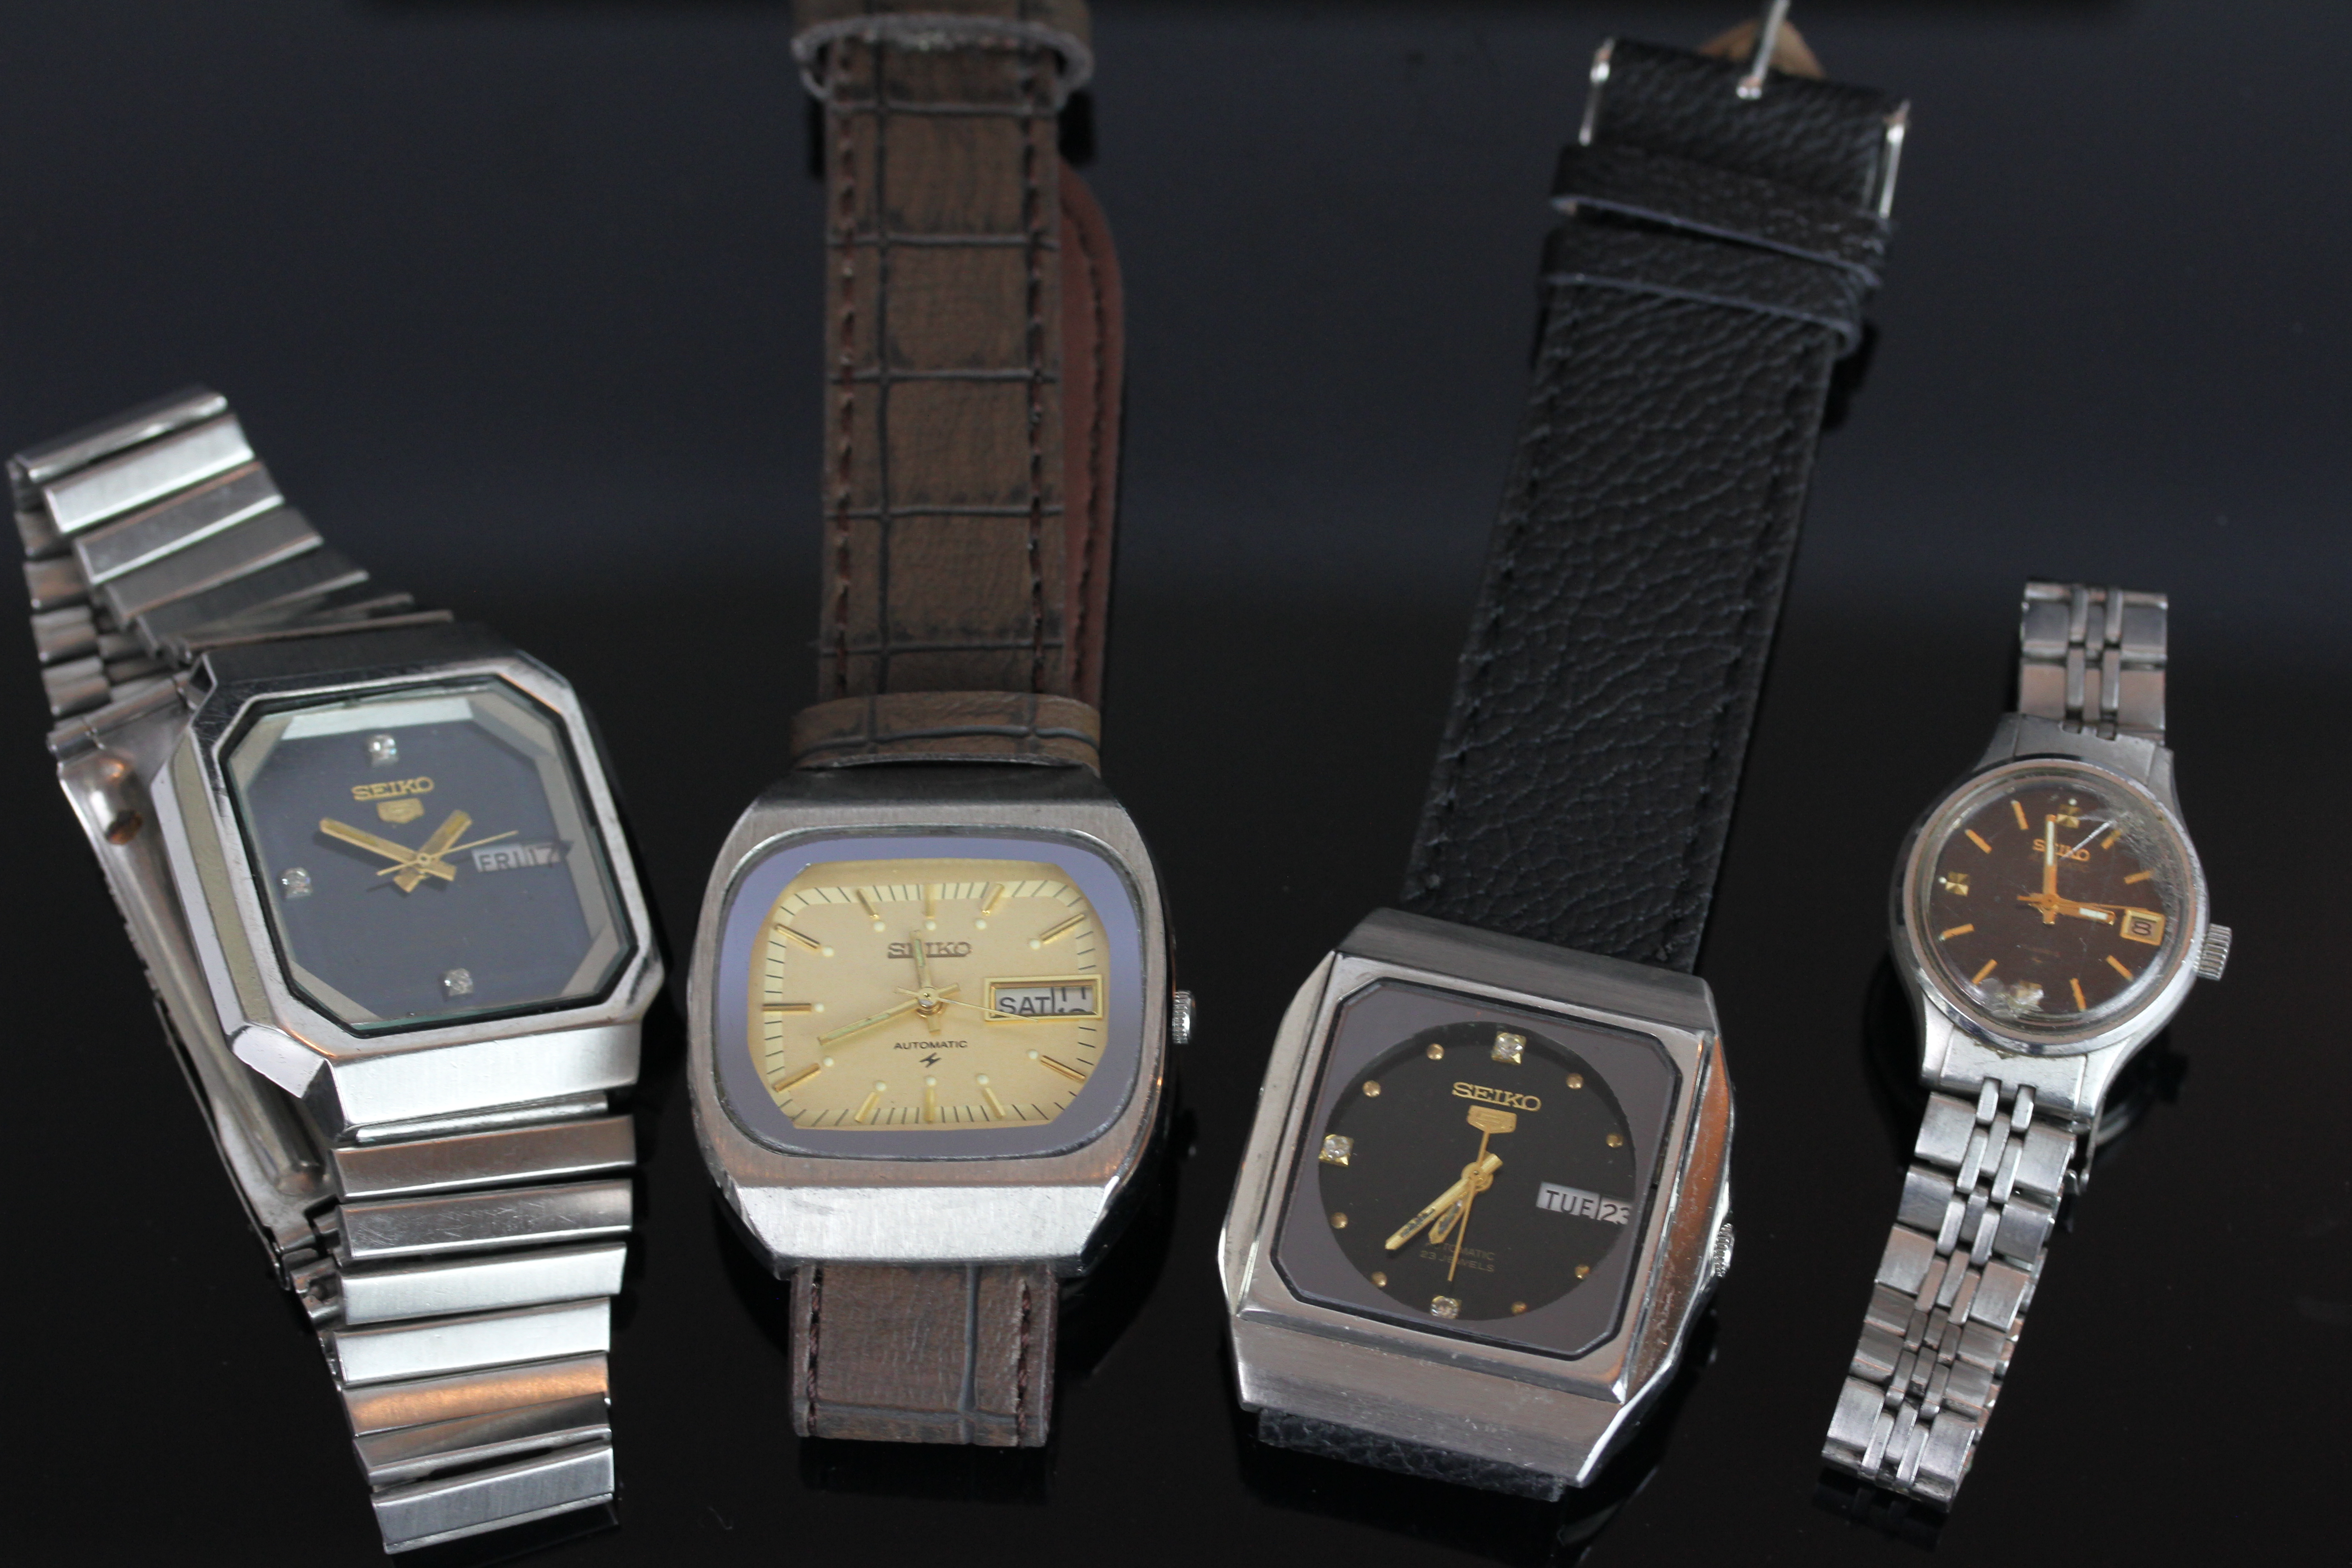 GROUP OF SEIKO 5 WRISTWATCHES, one ladies and three gents watches, two with Seiko bracelets, all